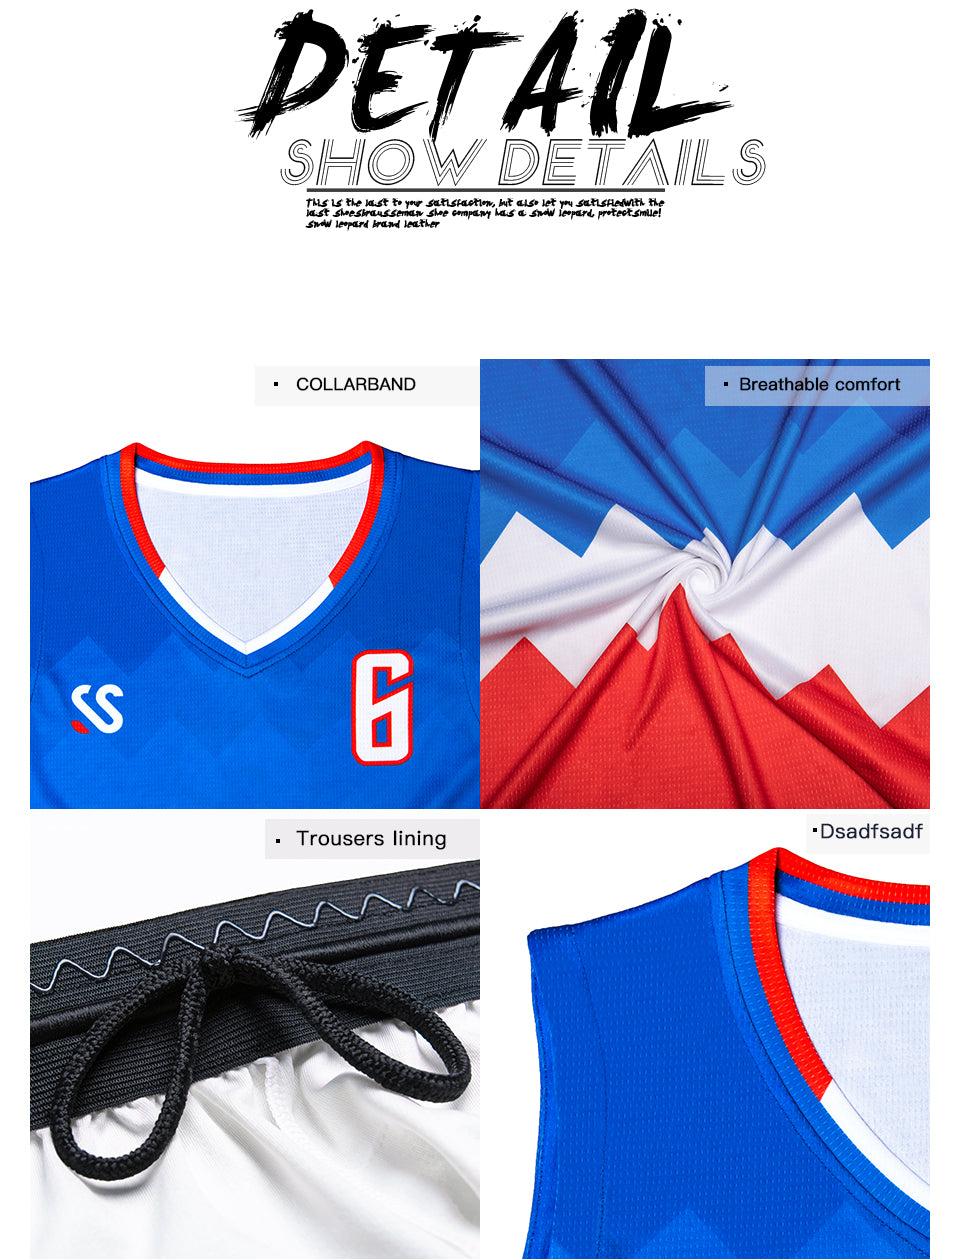 Custom Basketabll Jersey Full Sublimation Team Name/Number Casual Athletic Sleeveless Cool Shirts for Men/Women/Youth Outdoors